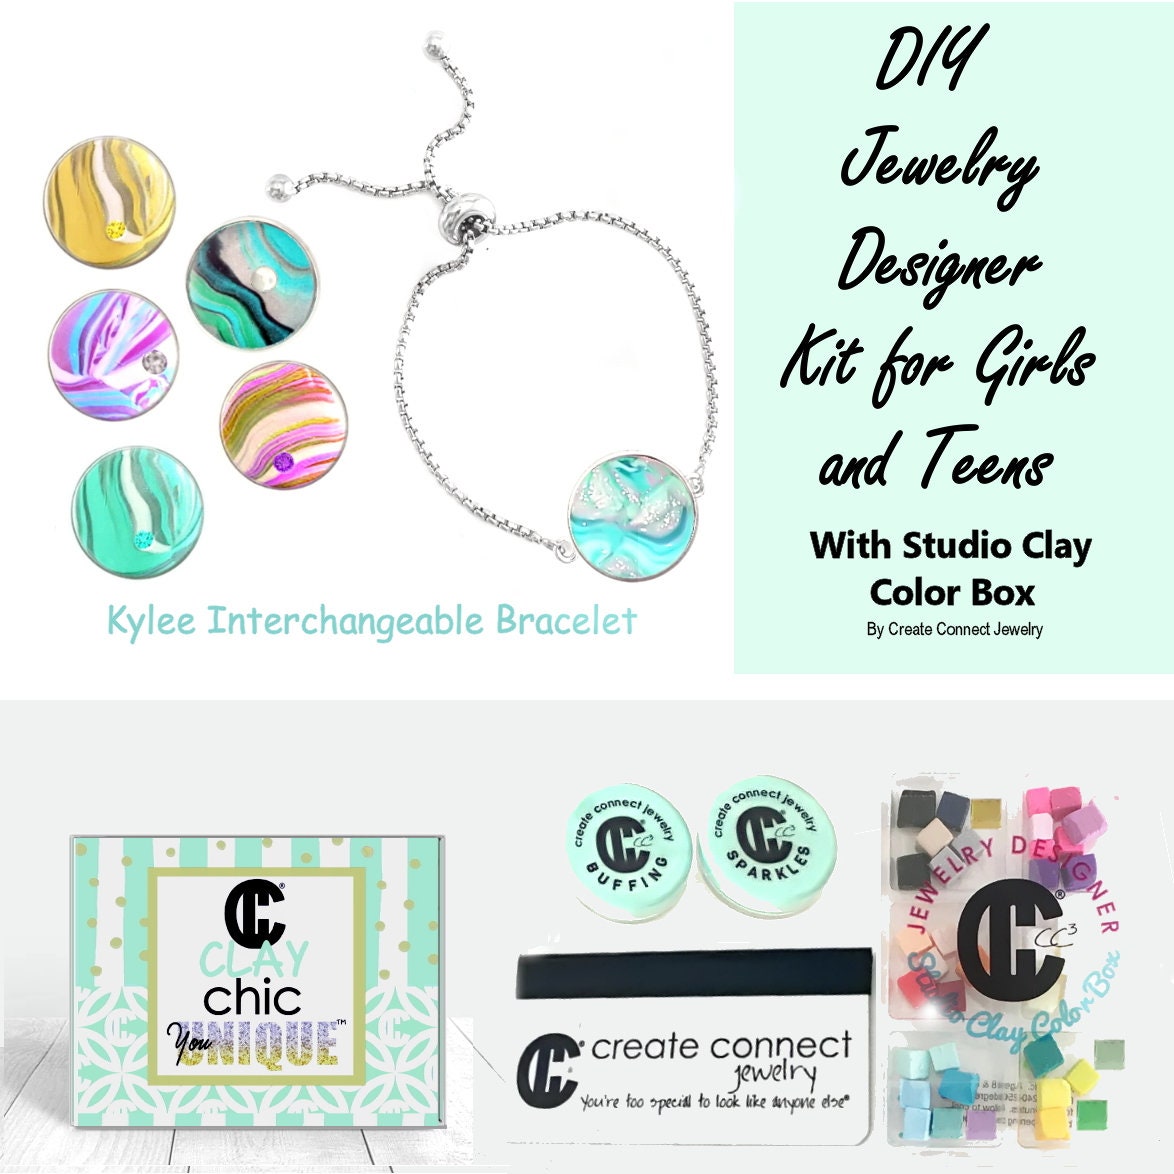 DIY Jewelry Making Kit for Girls and Teens With Oven-bake Jewelry